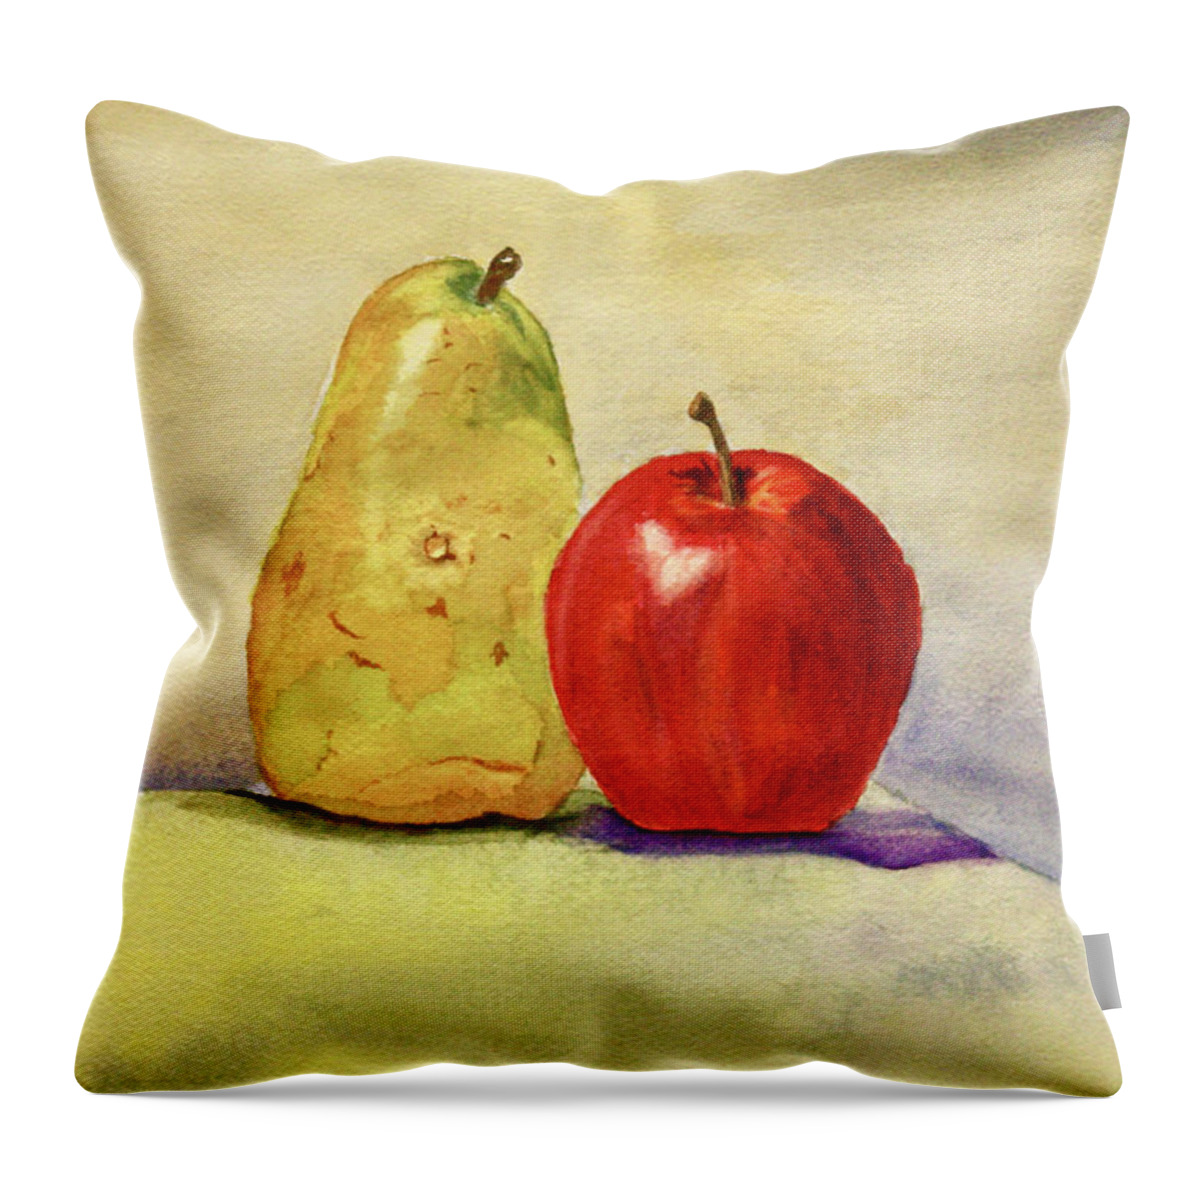 Fruit Throw Pillow featuring the painting Pear with Apple by Peggy Rose